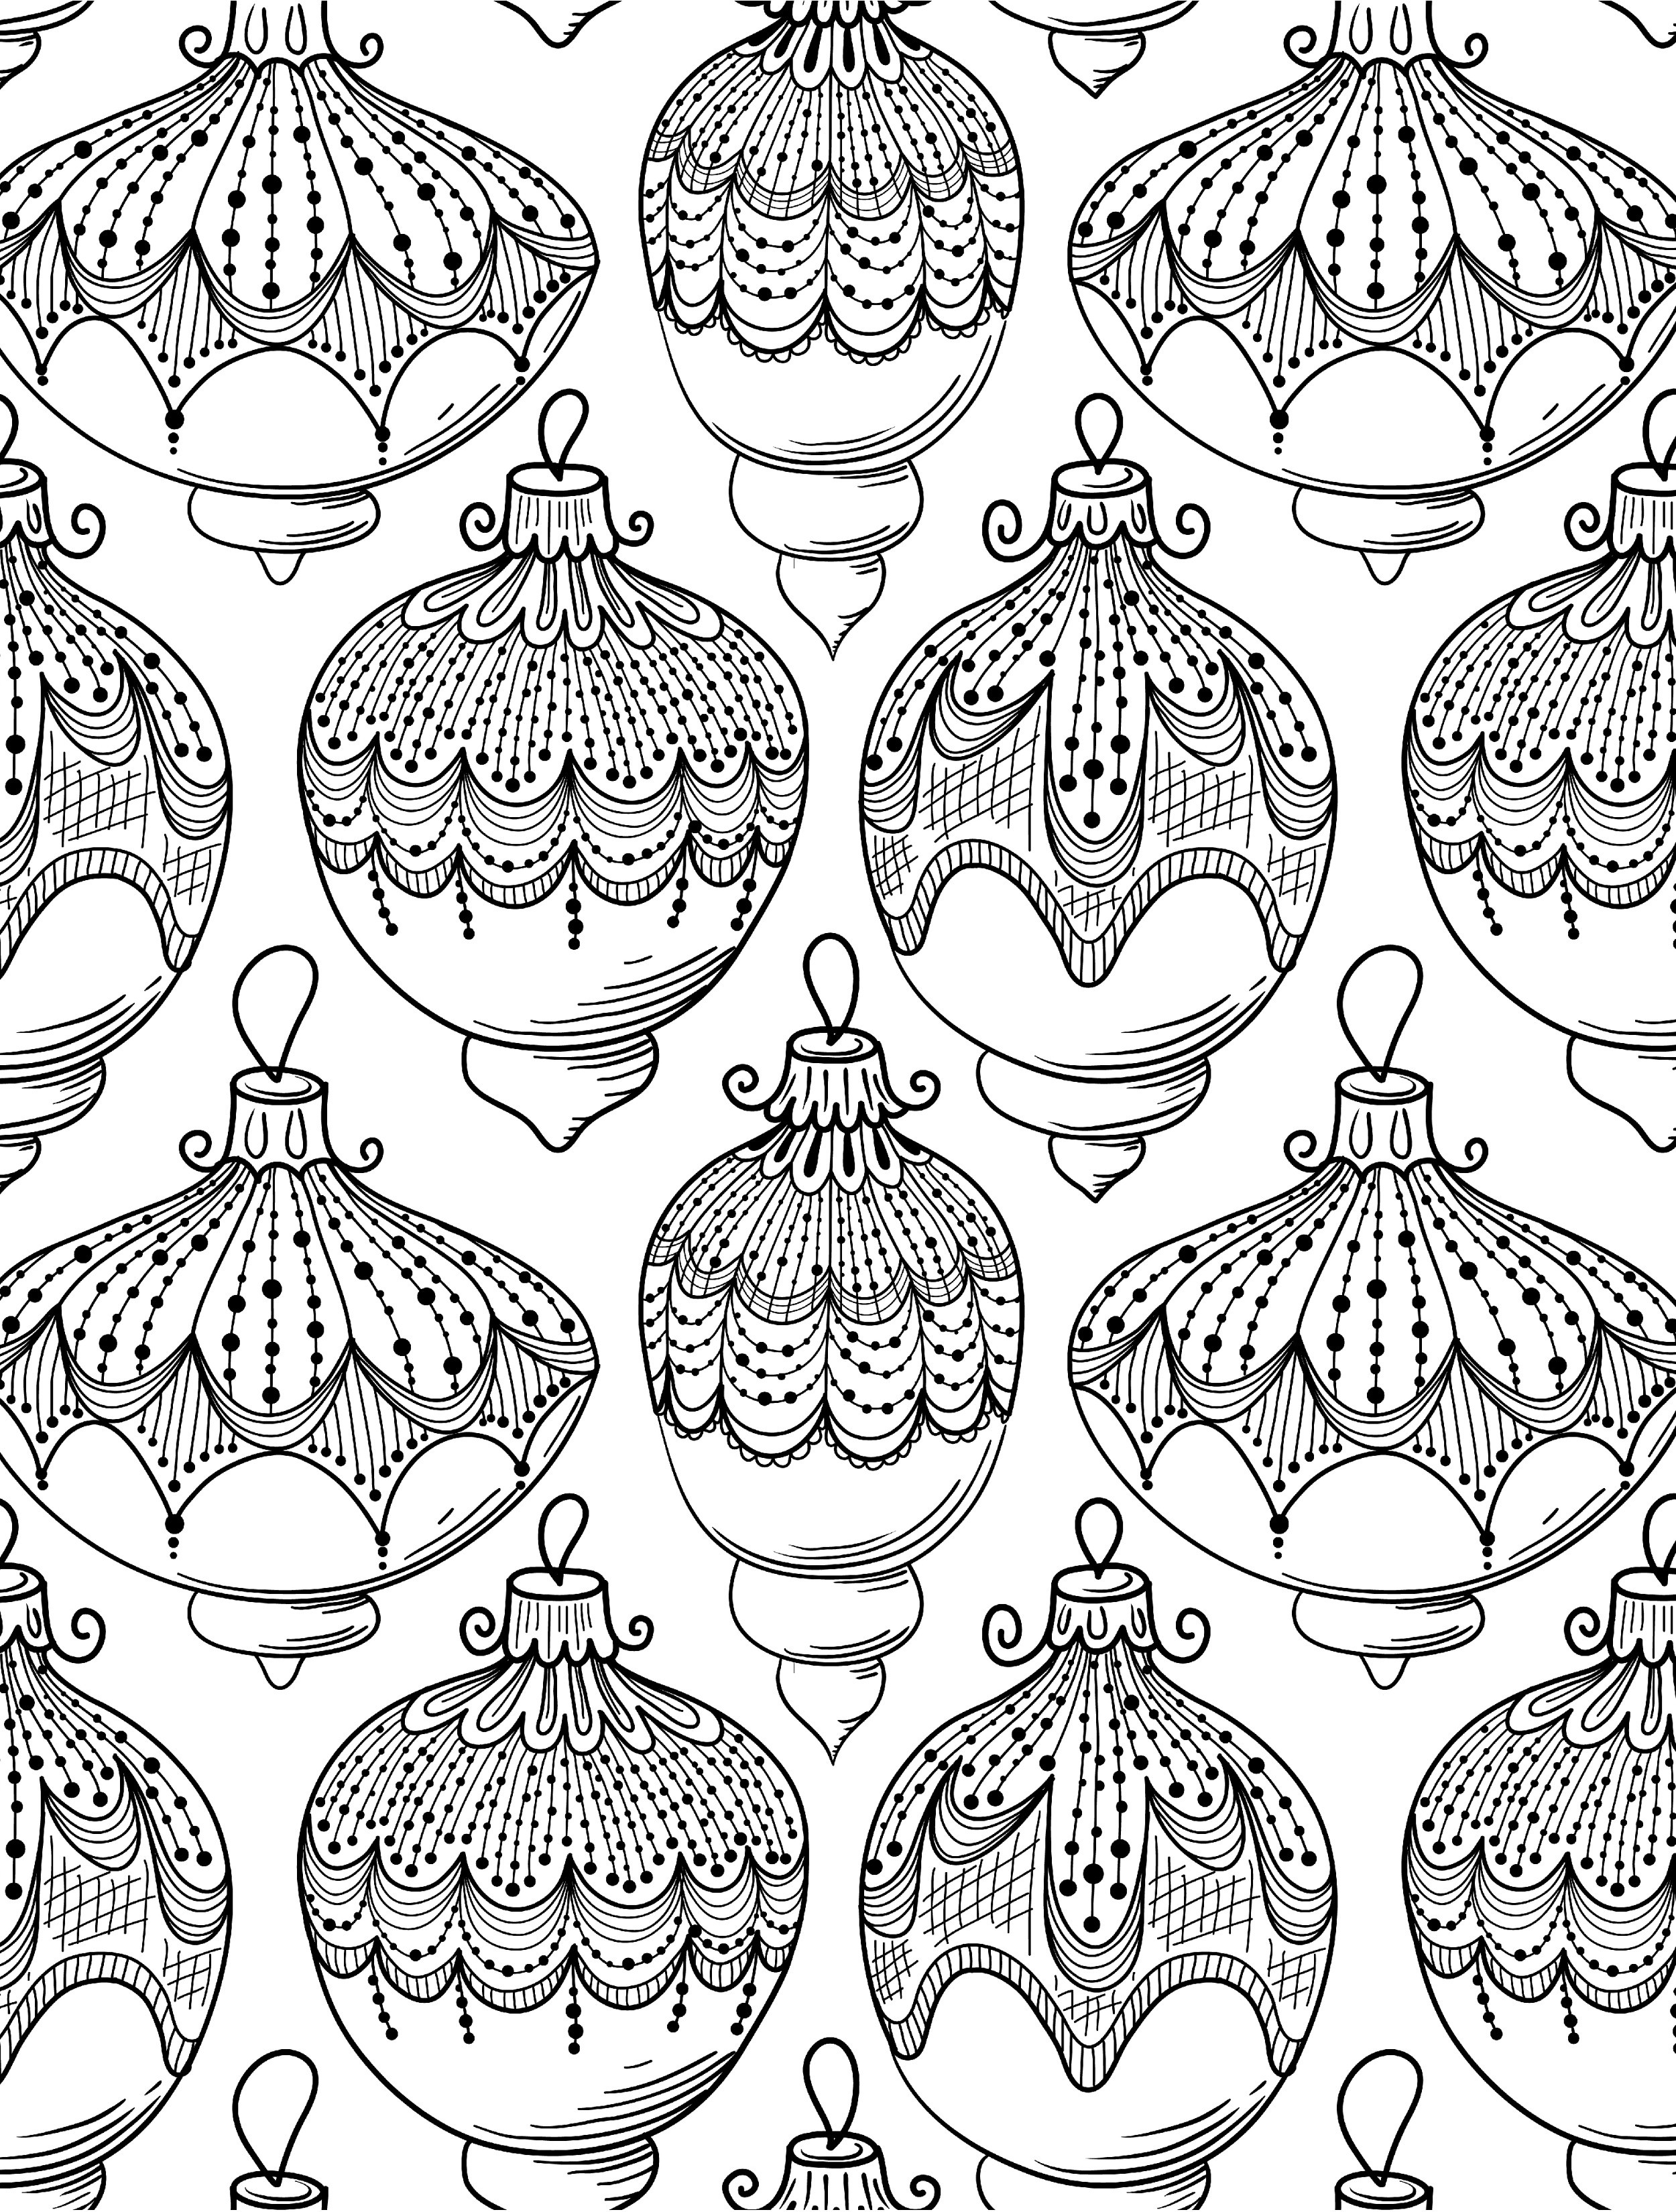 Free Downloadable Coloring Pages For Adults
 Coloring Pages for Adults Free Printable 42 Collections